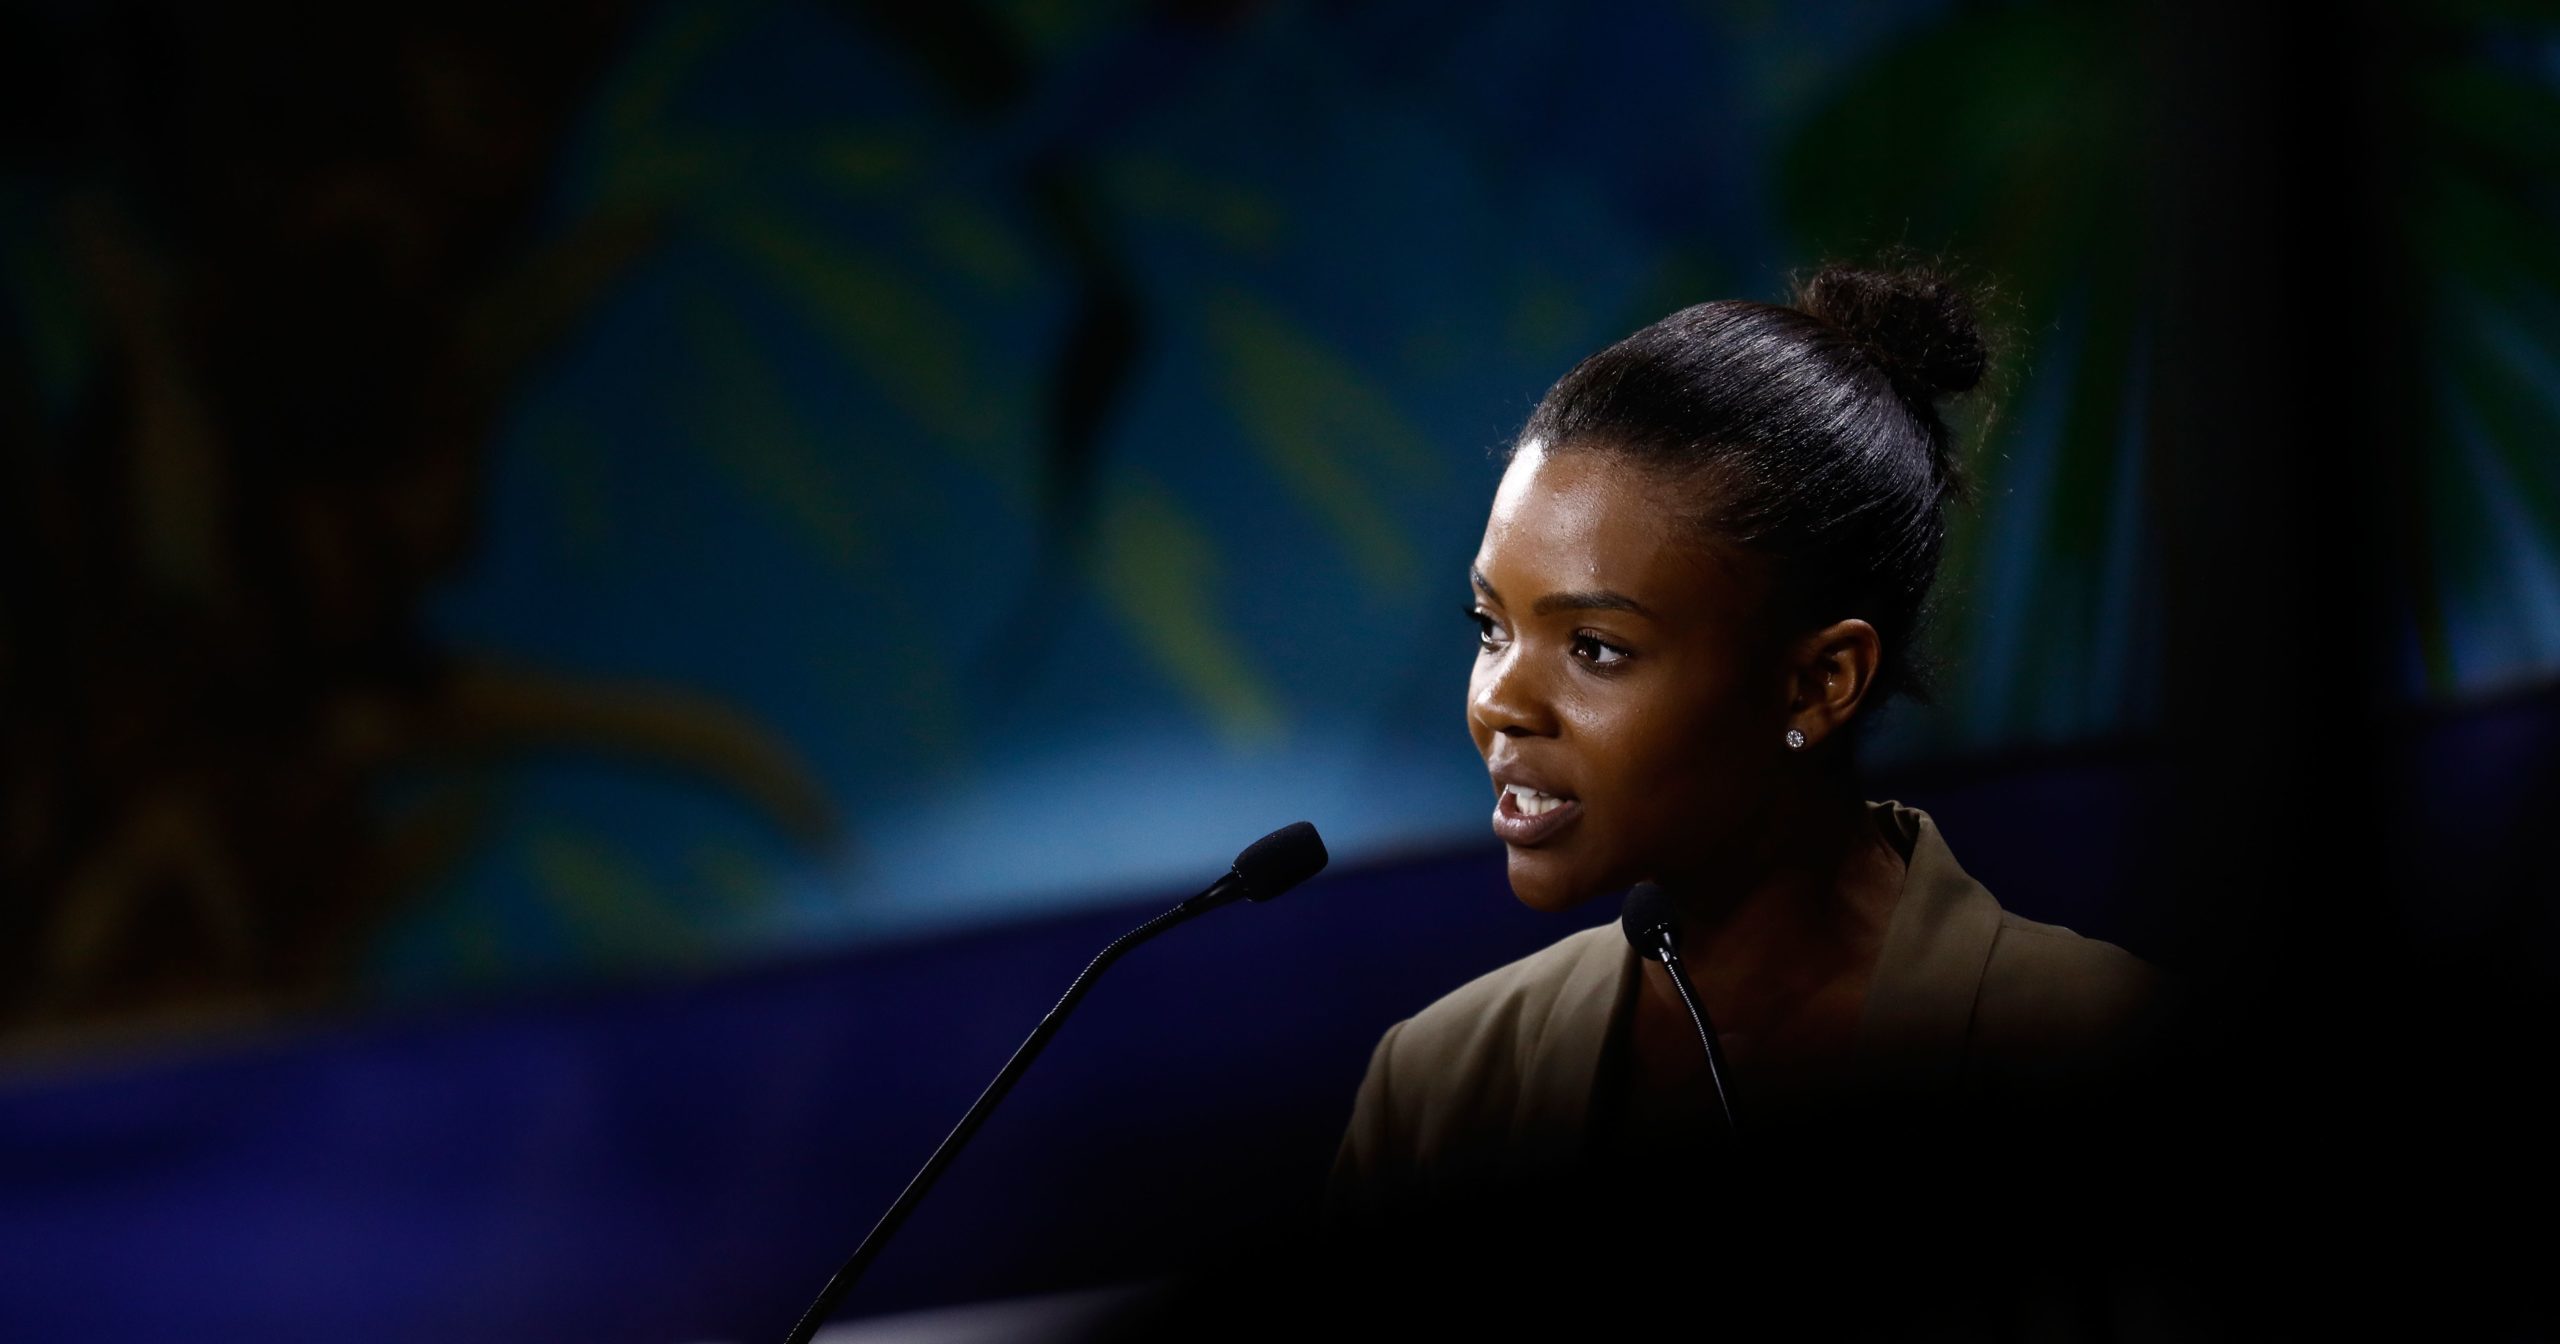 onservative activist and BLEXIT founder Candace Owens delivers a speech in Paris on Sept. 28, 2019. In a video released two weeks ago on Twitter, Owens announced she was working with big-name attorneys to sue Facebook fact-checkers.